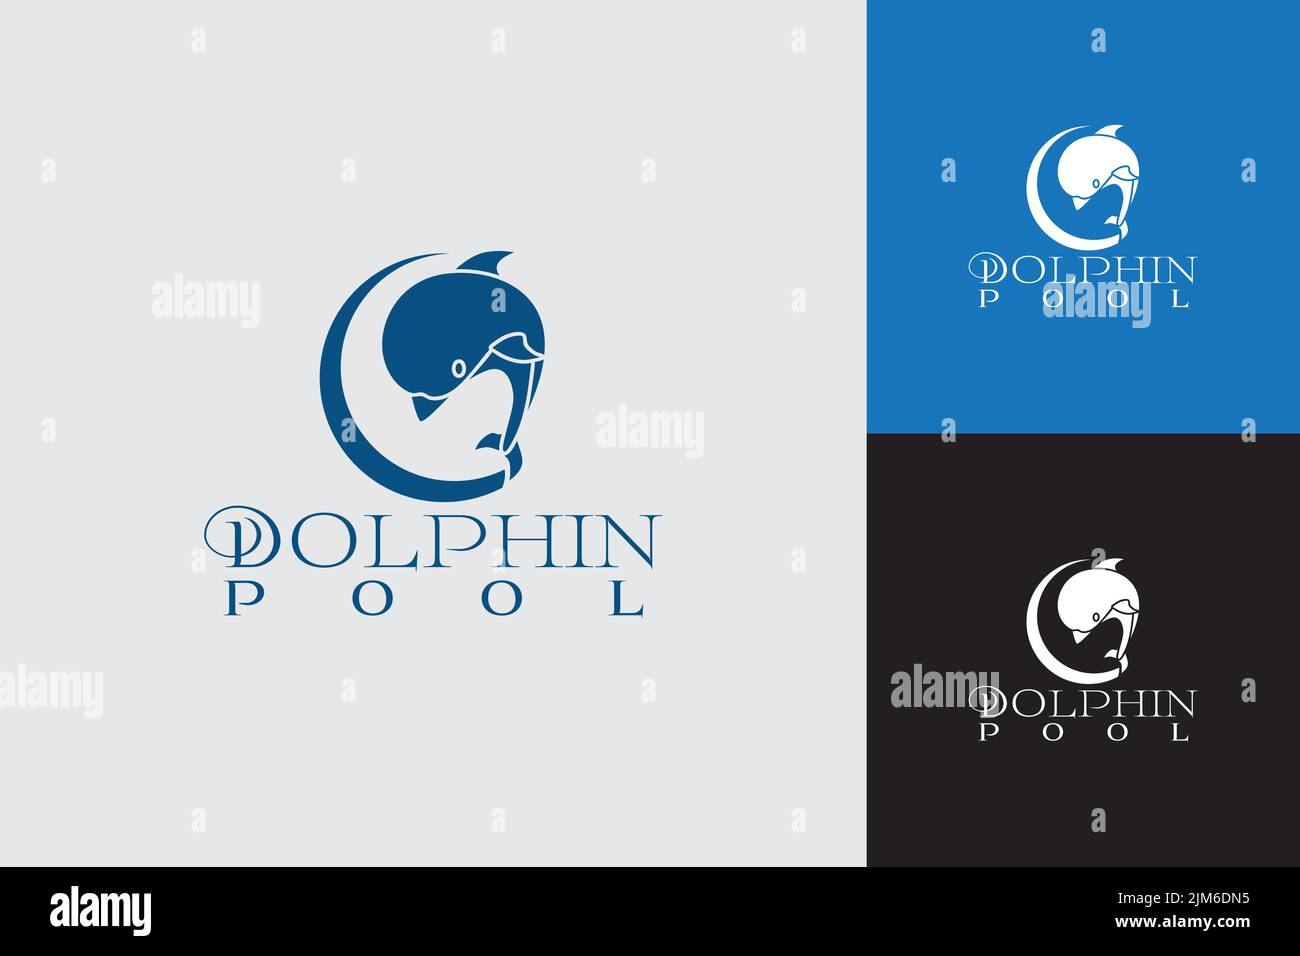 Simple and flat dolphin icon logo suitable for swimming pool, health club, club etc. Stock Vector